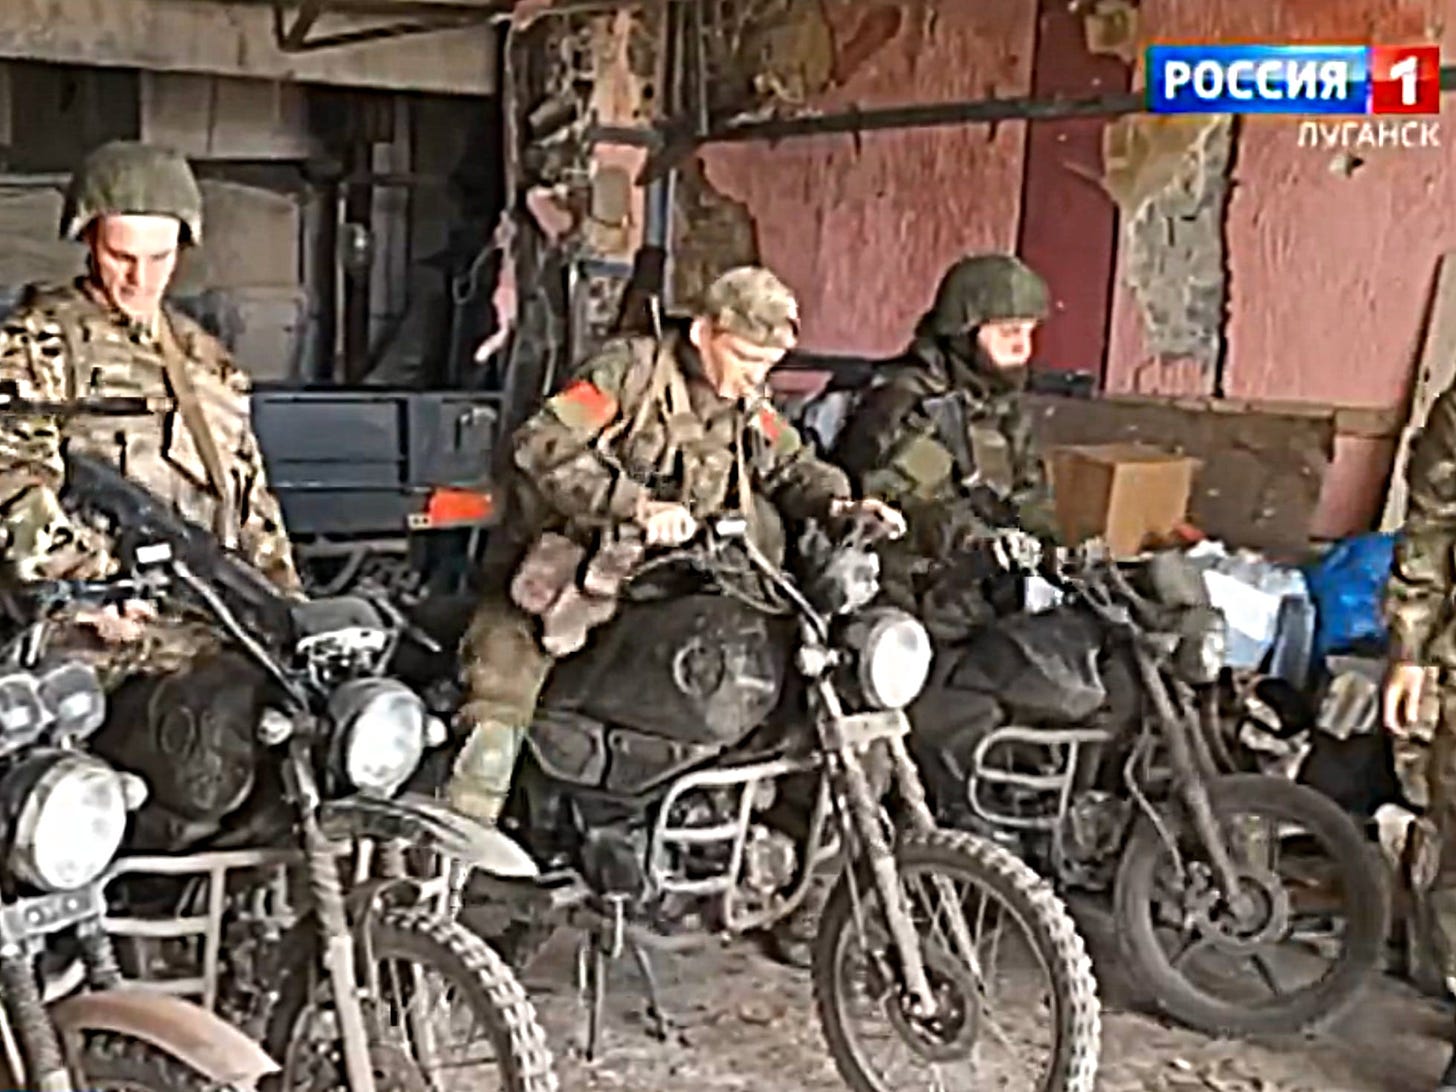 Russian army develops motorcycle assault units to carry out lightning  attacks on the front lines | International | EL PAÍS English